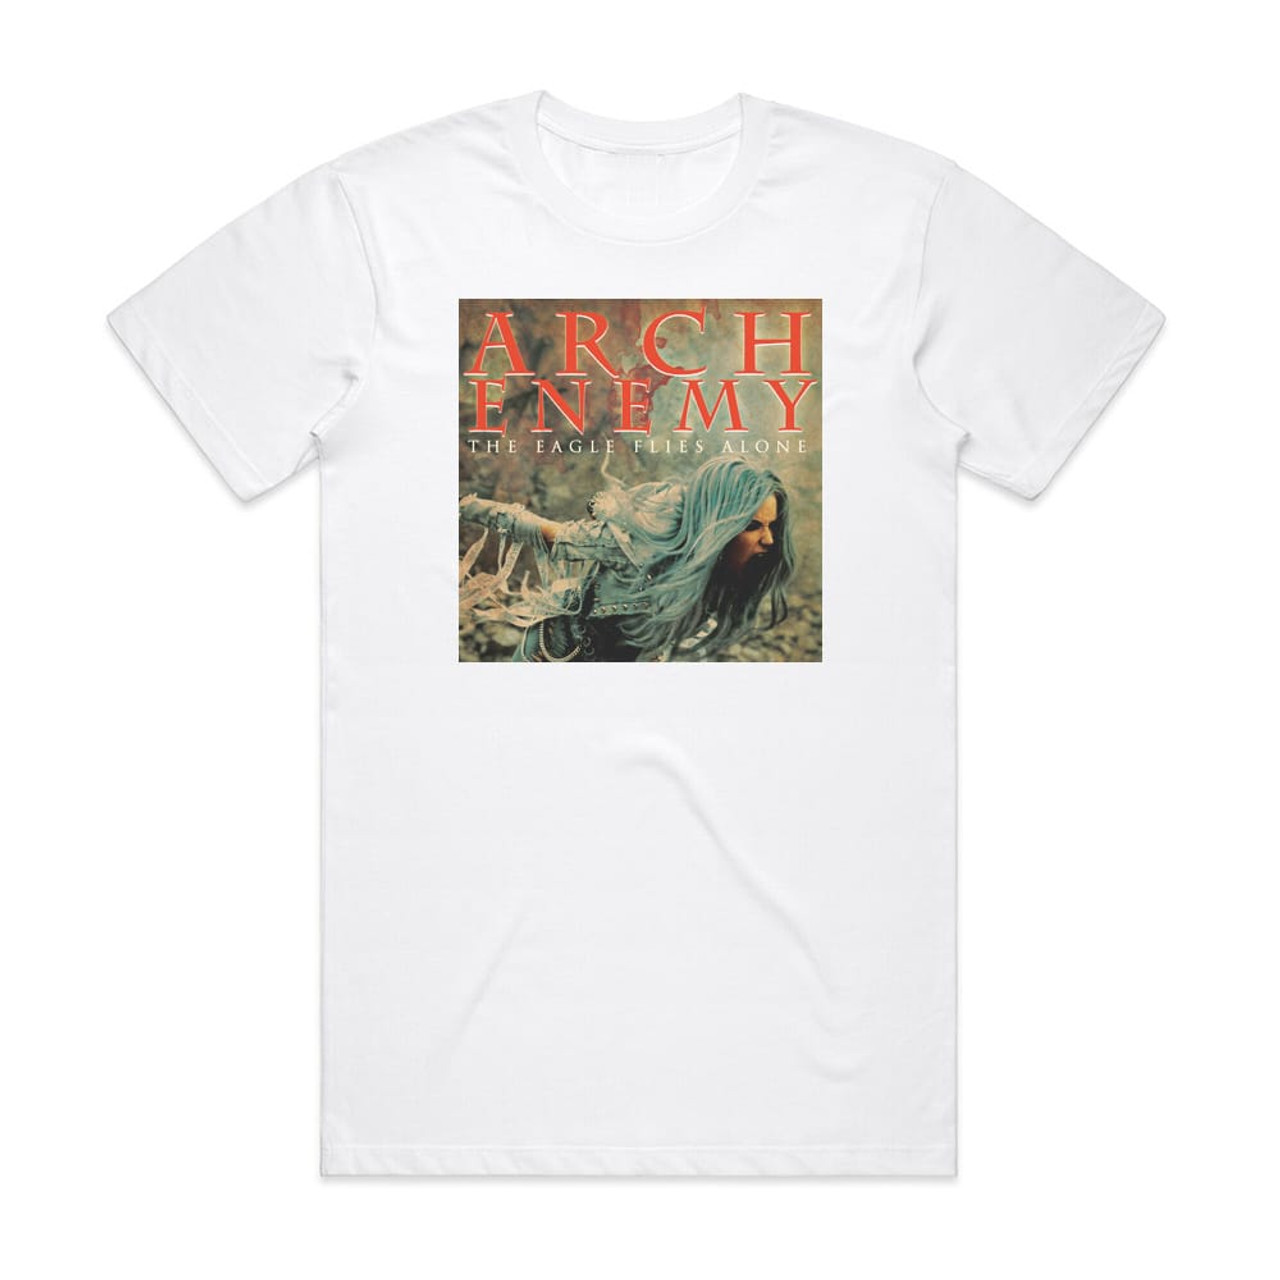 Arch Enemy The Eagle Flies Alone Album Cover T-Shirt White